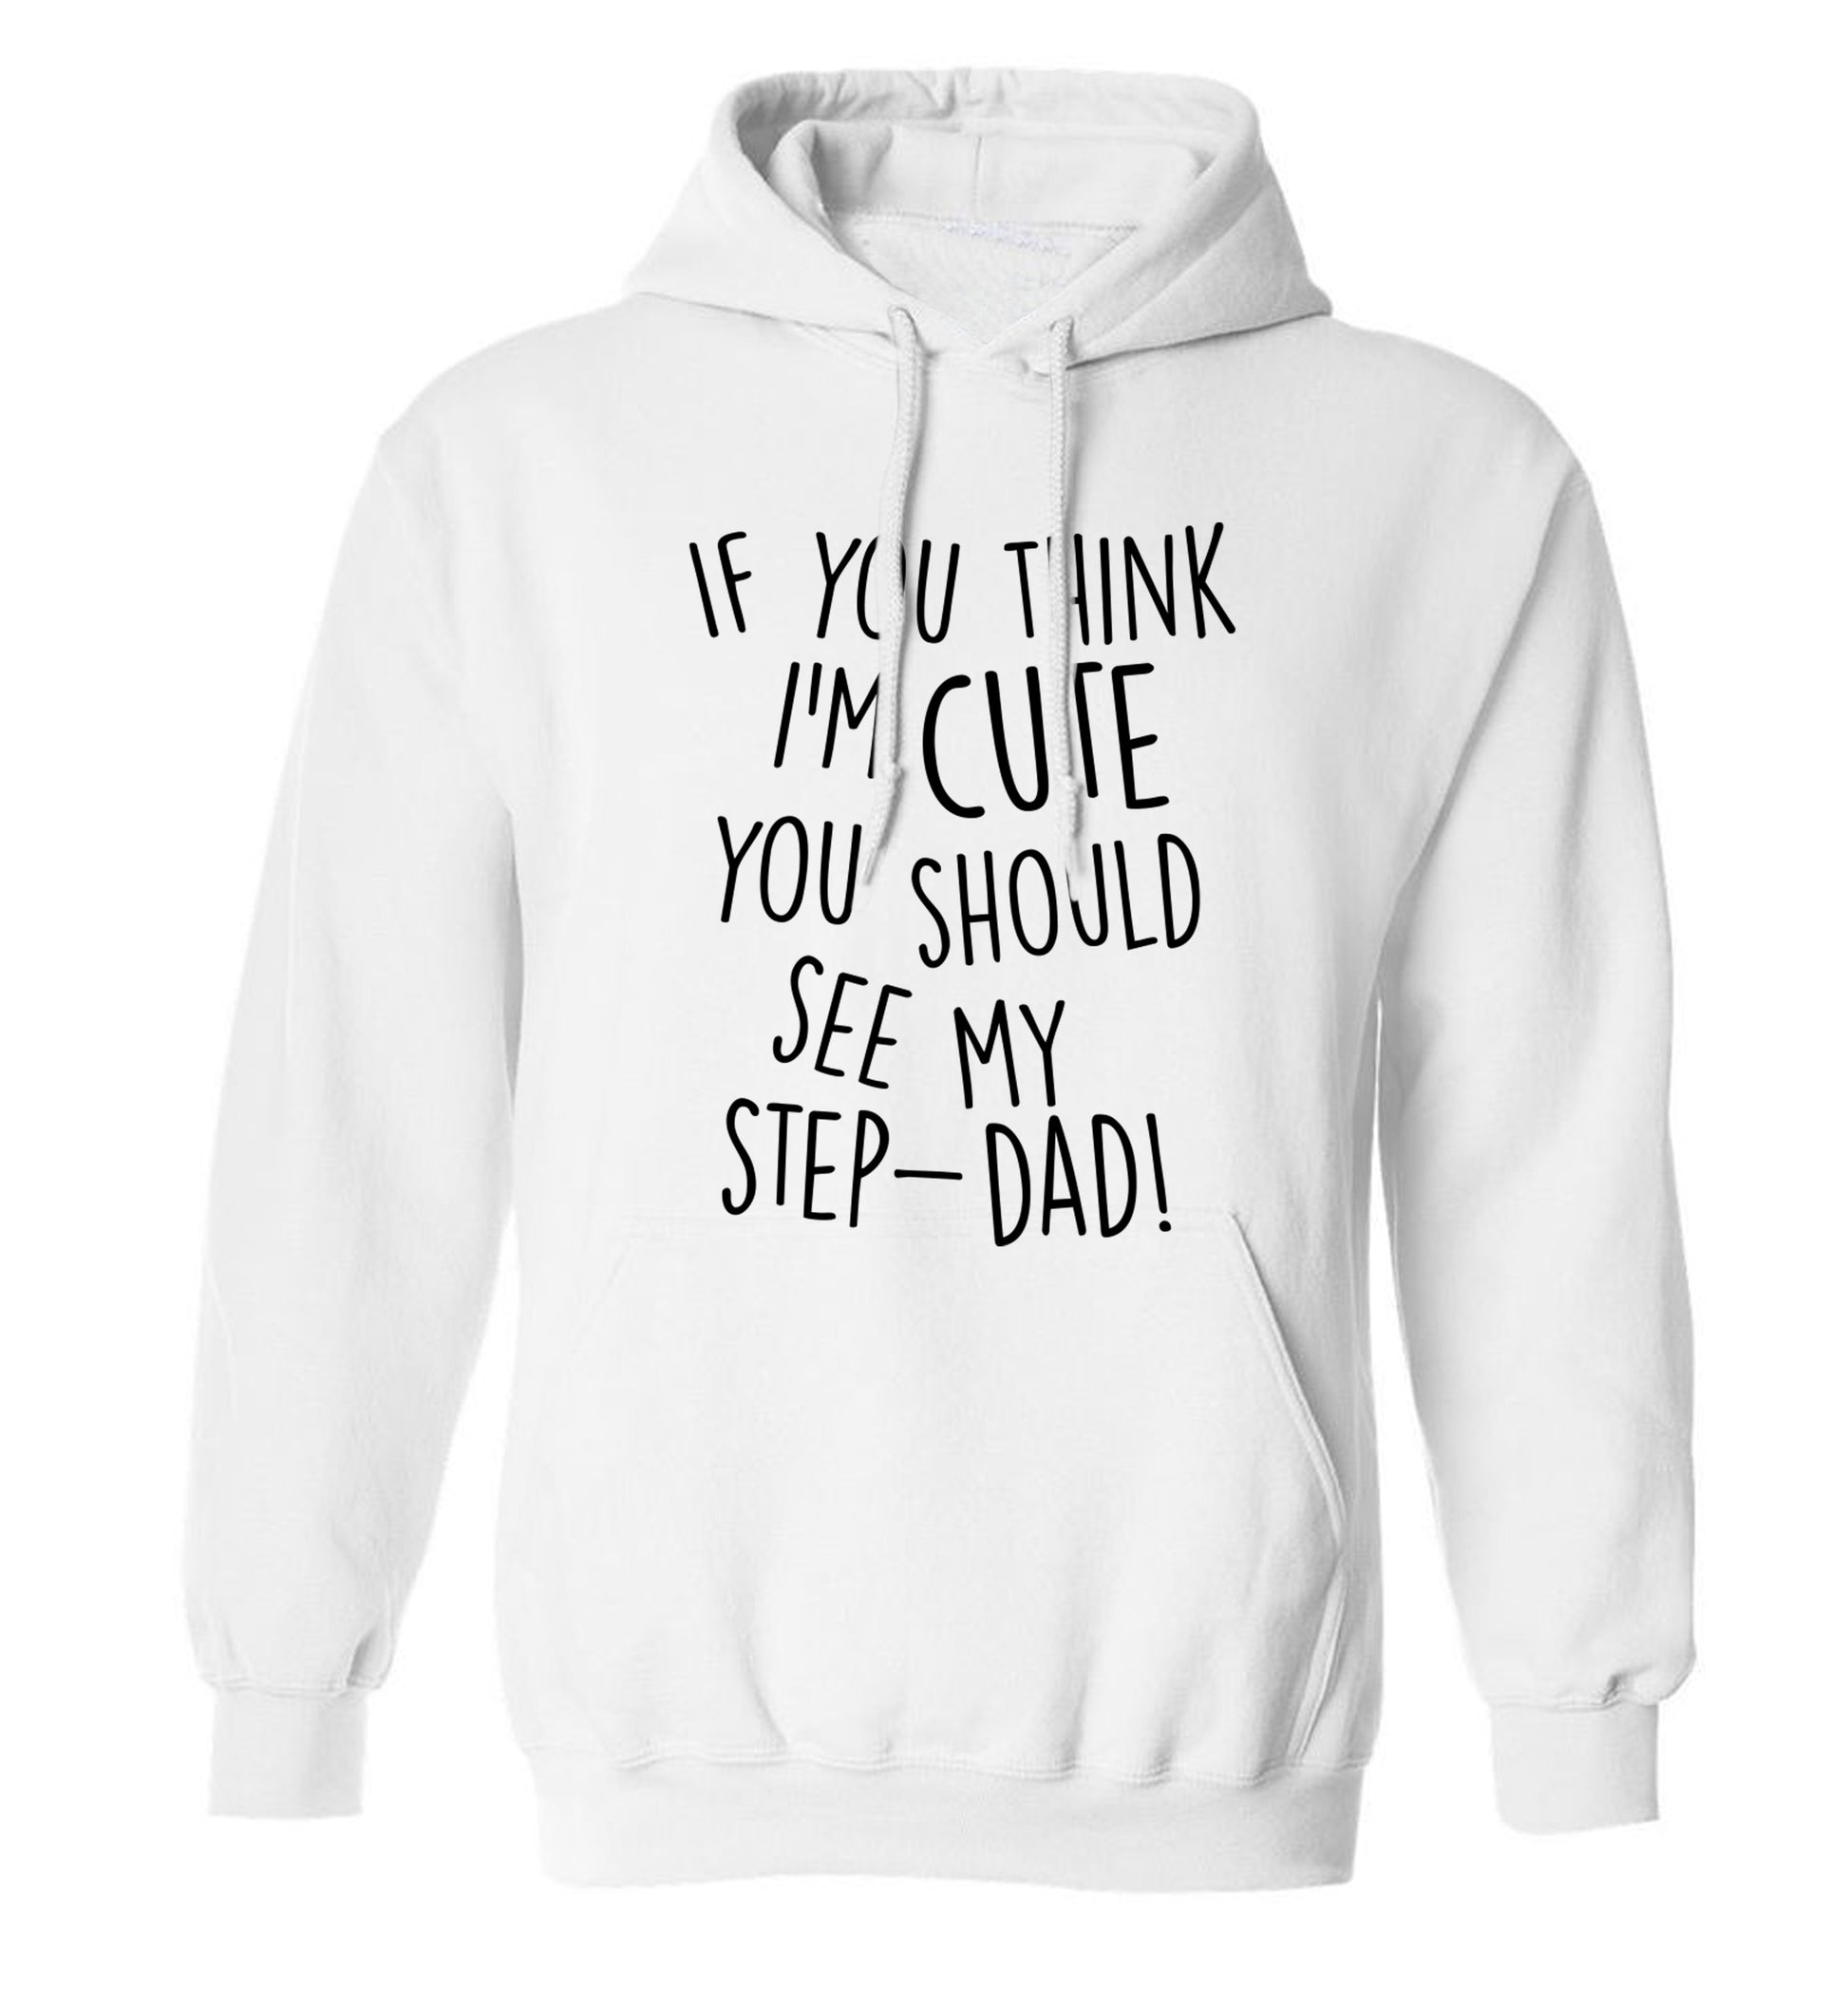 If you think I'm cute you should see my step-dad adults unisex white hoodie 2XL